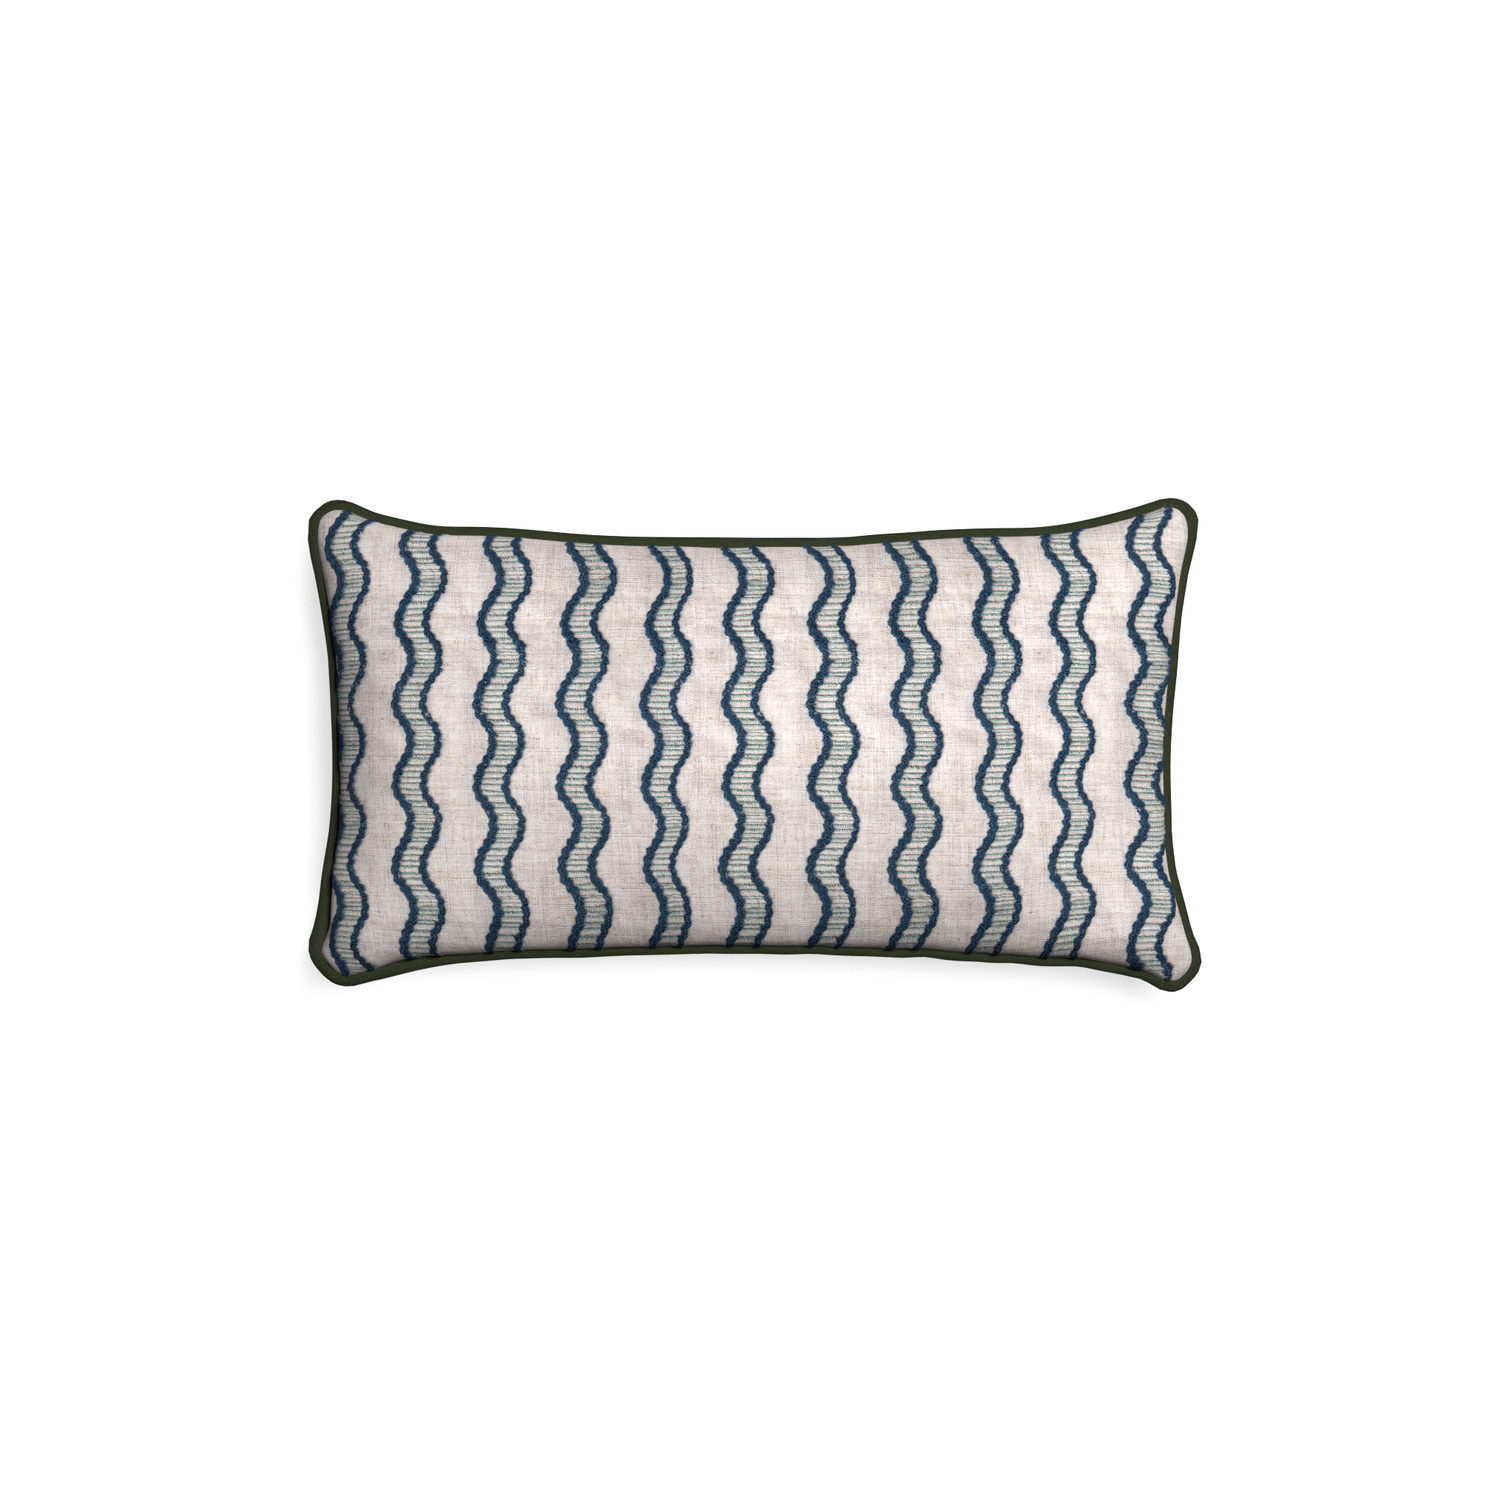 Petite-lumbar beatrice custom embroidered wavepillow with f piping on white background